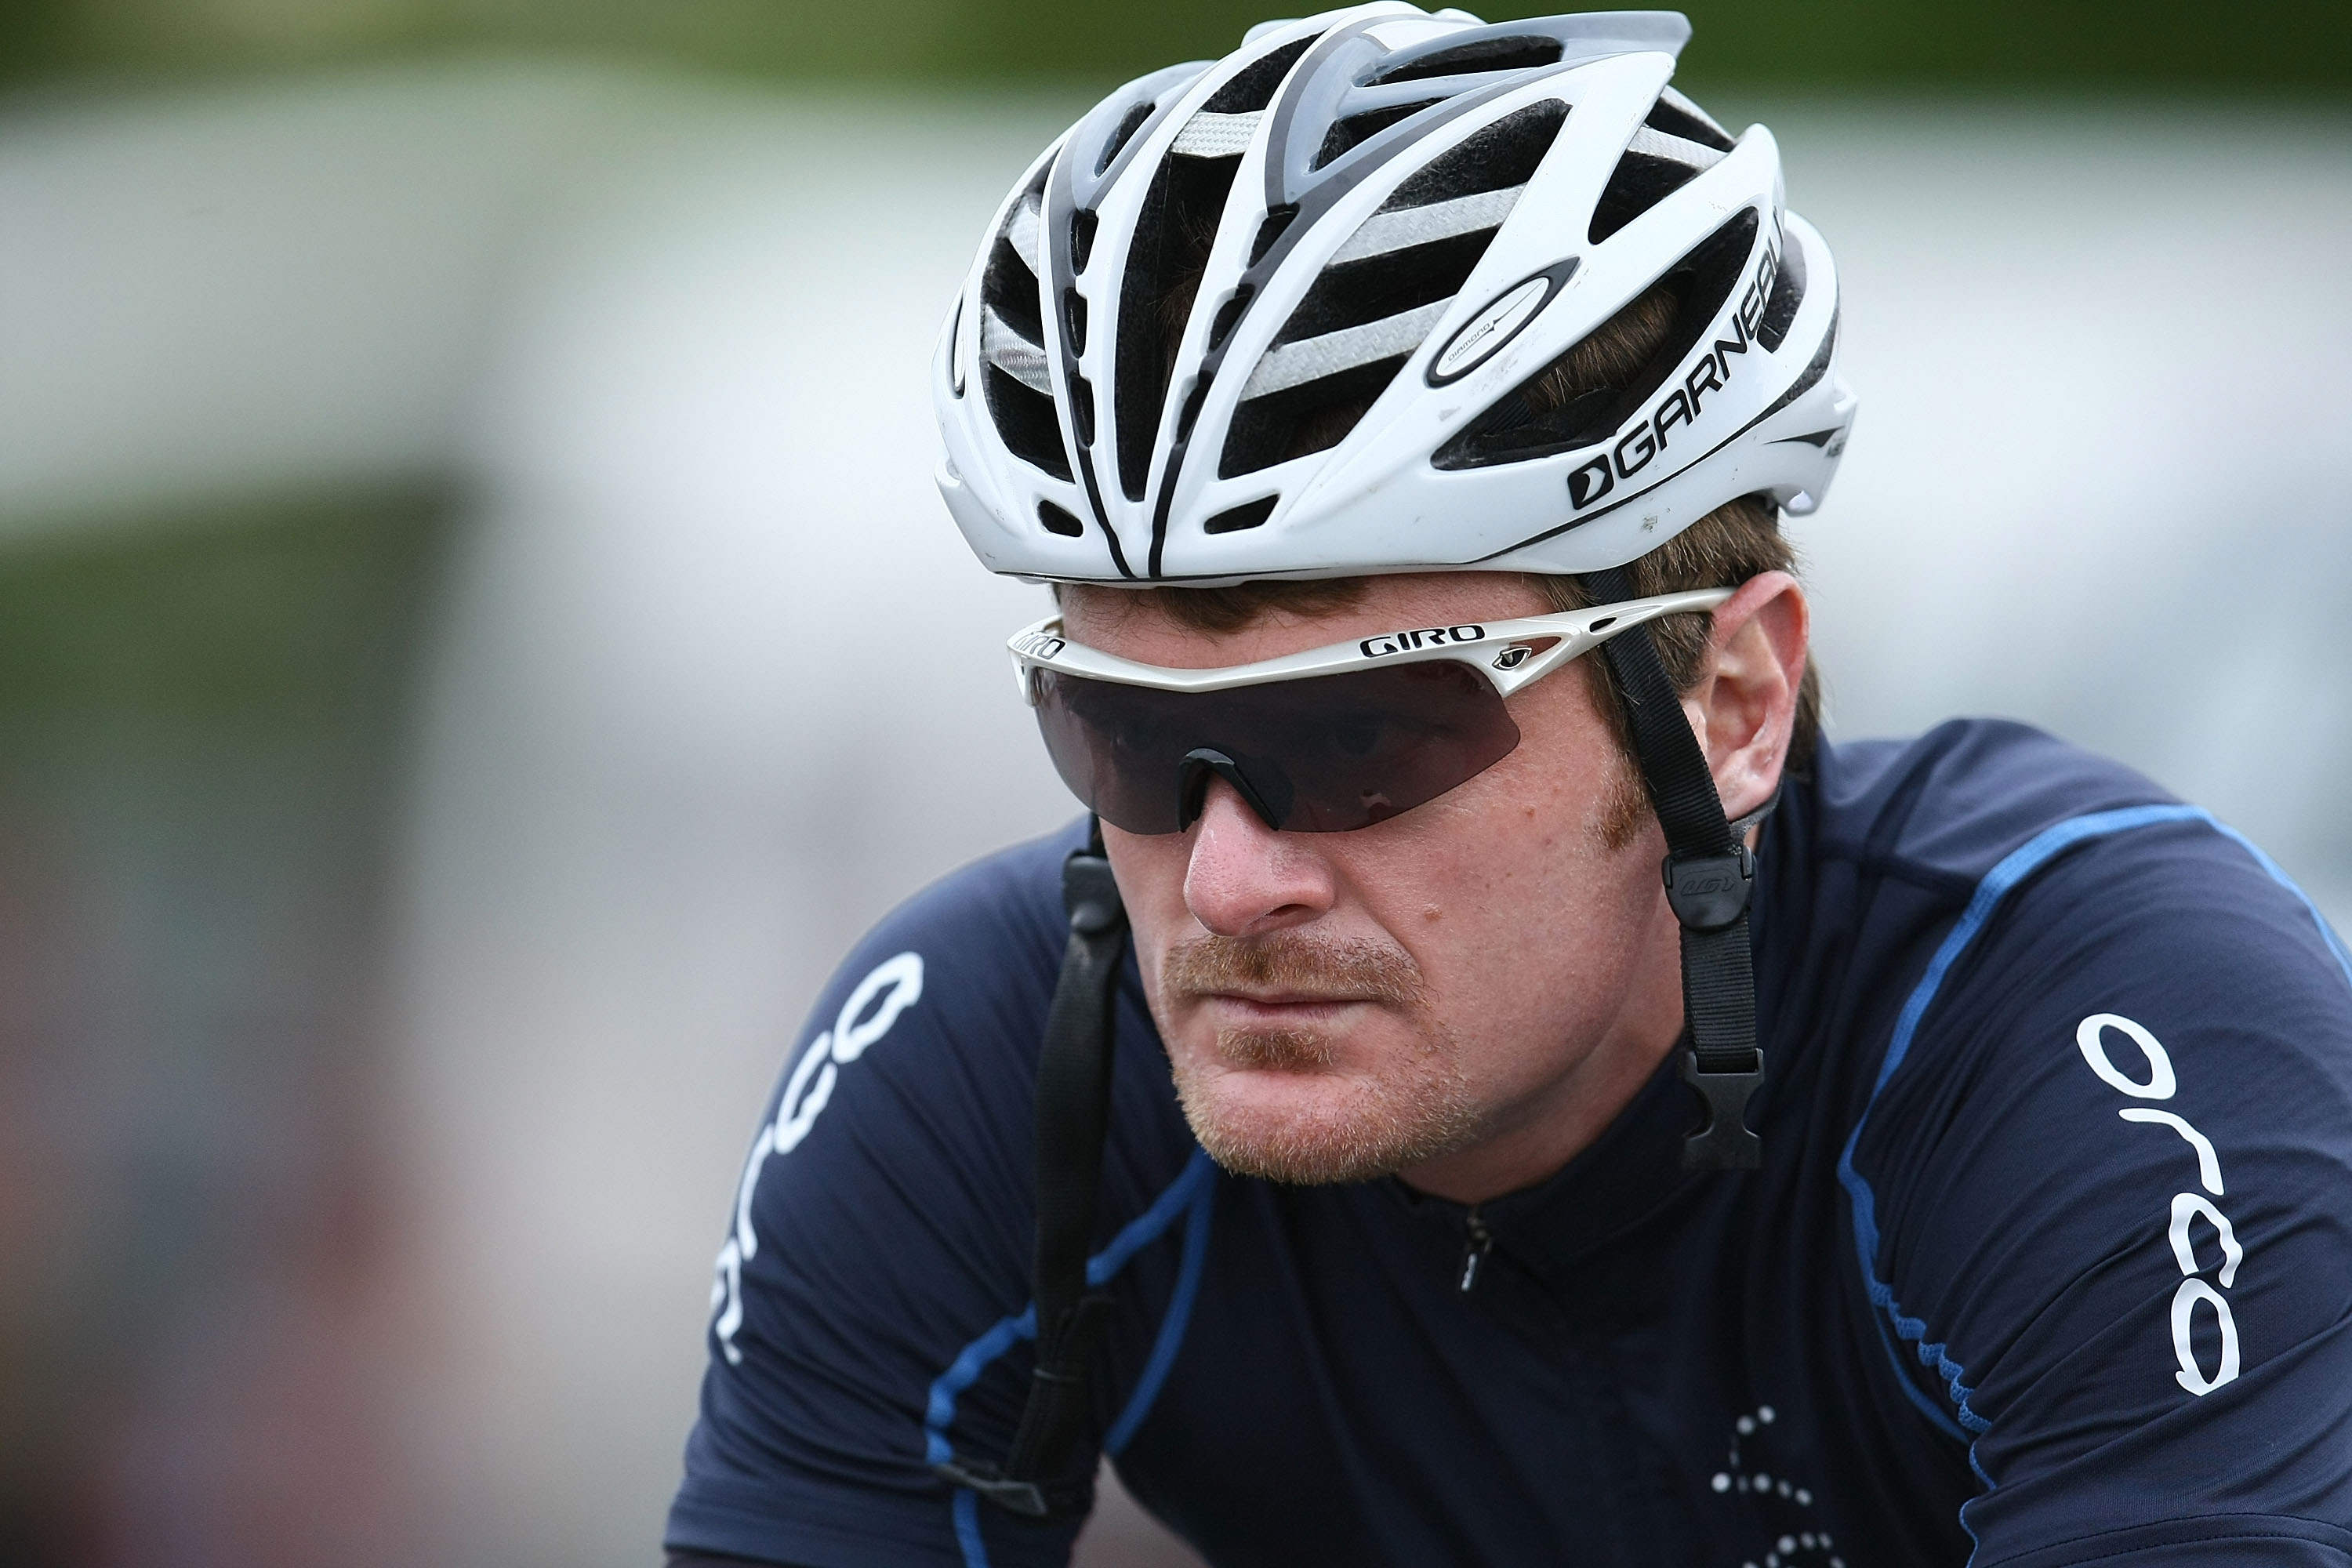 Floyd Landis experienced the highs and the very lows of life in 2006.